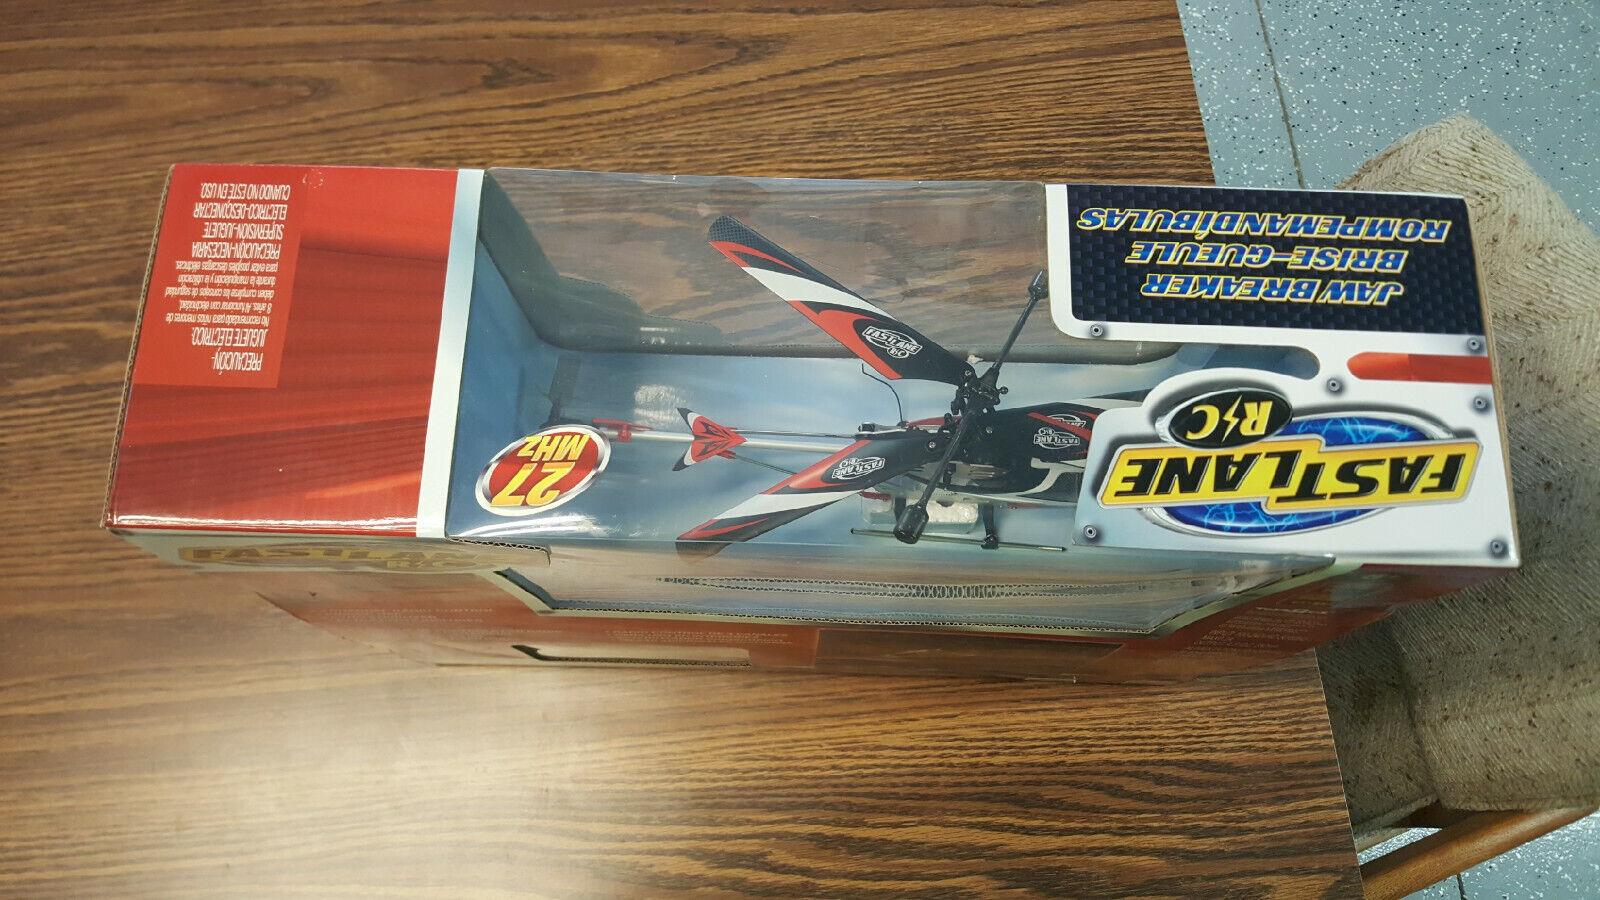 Fast Lane Rc Helicopter: Top brands for fast lane RC helicopters